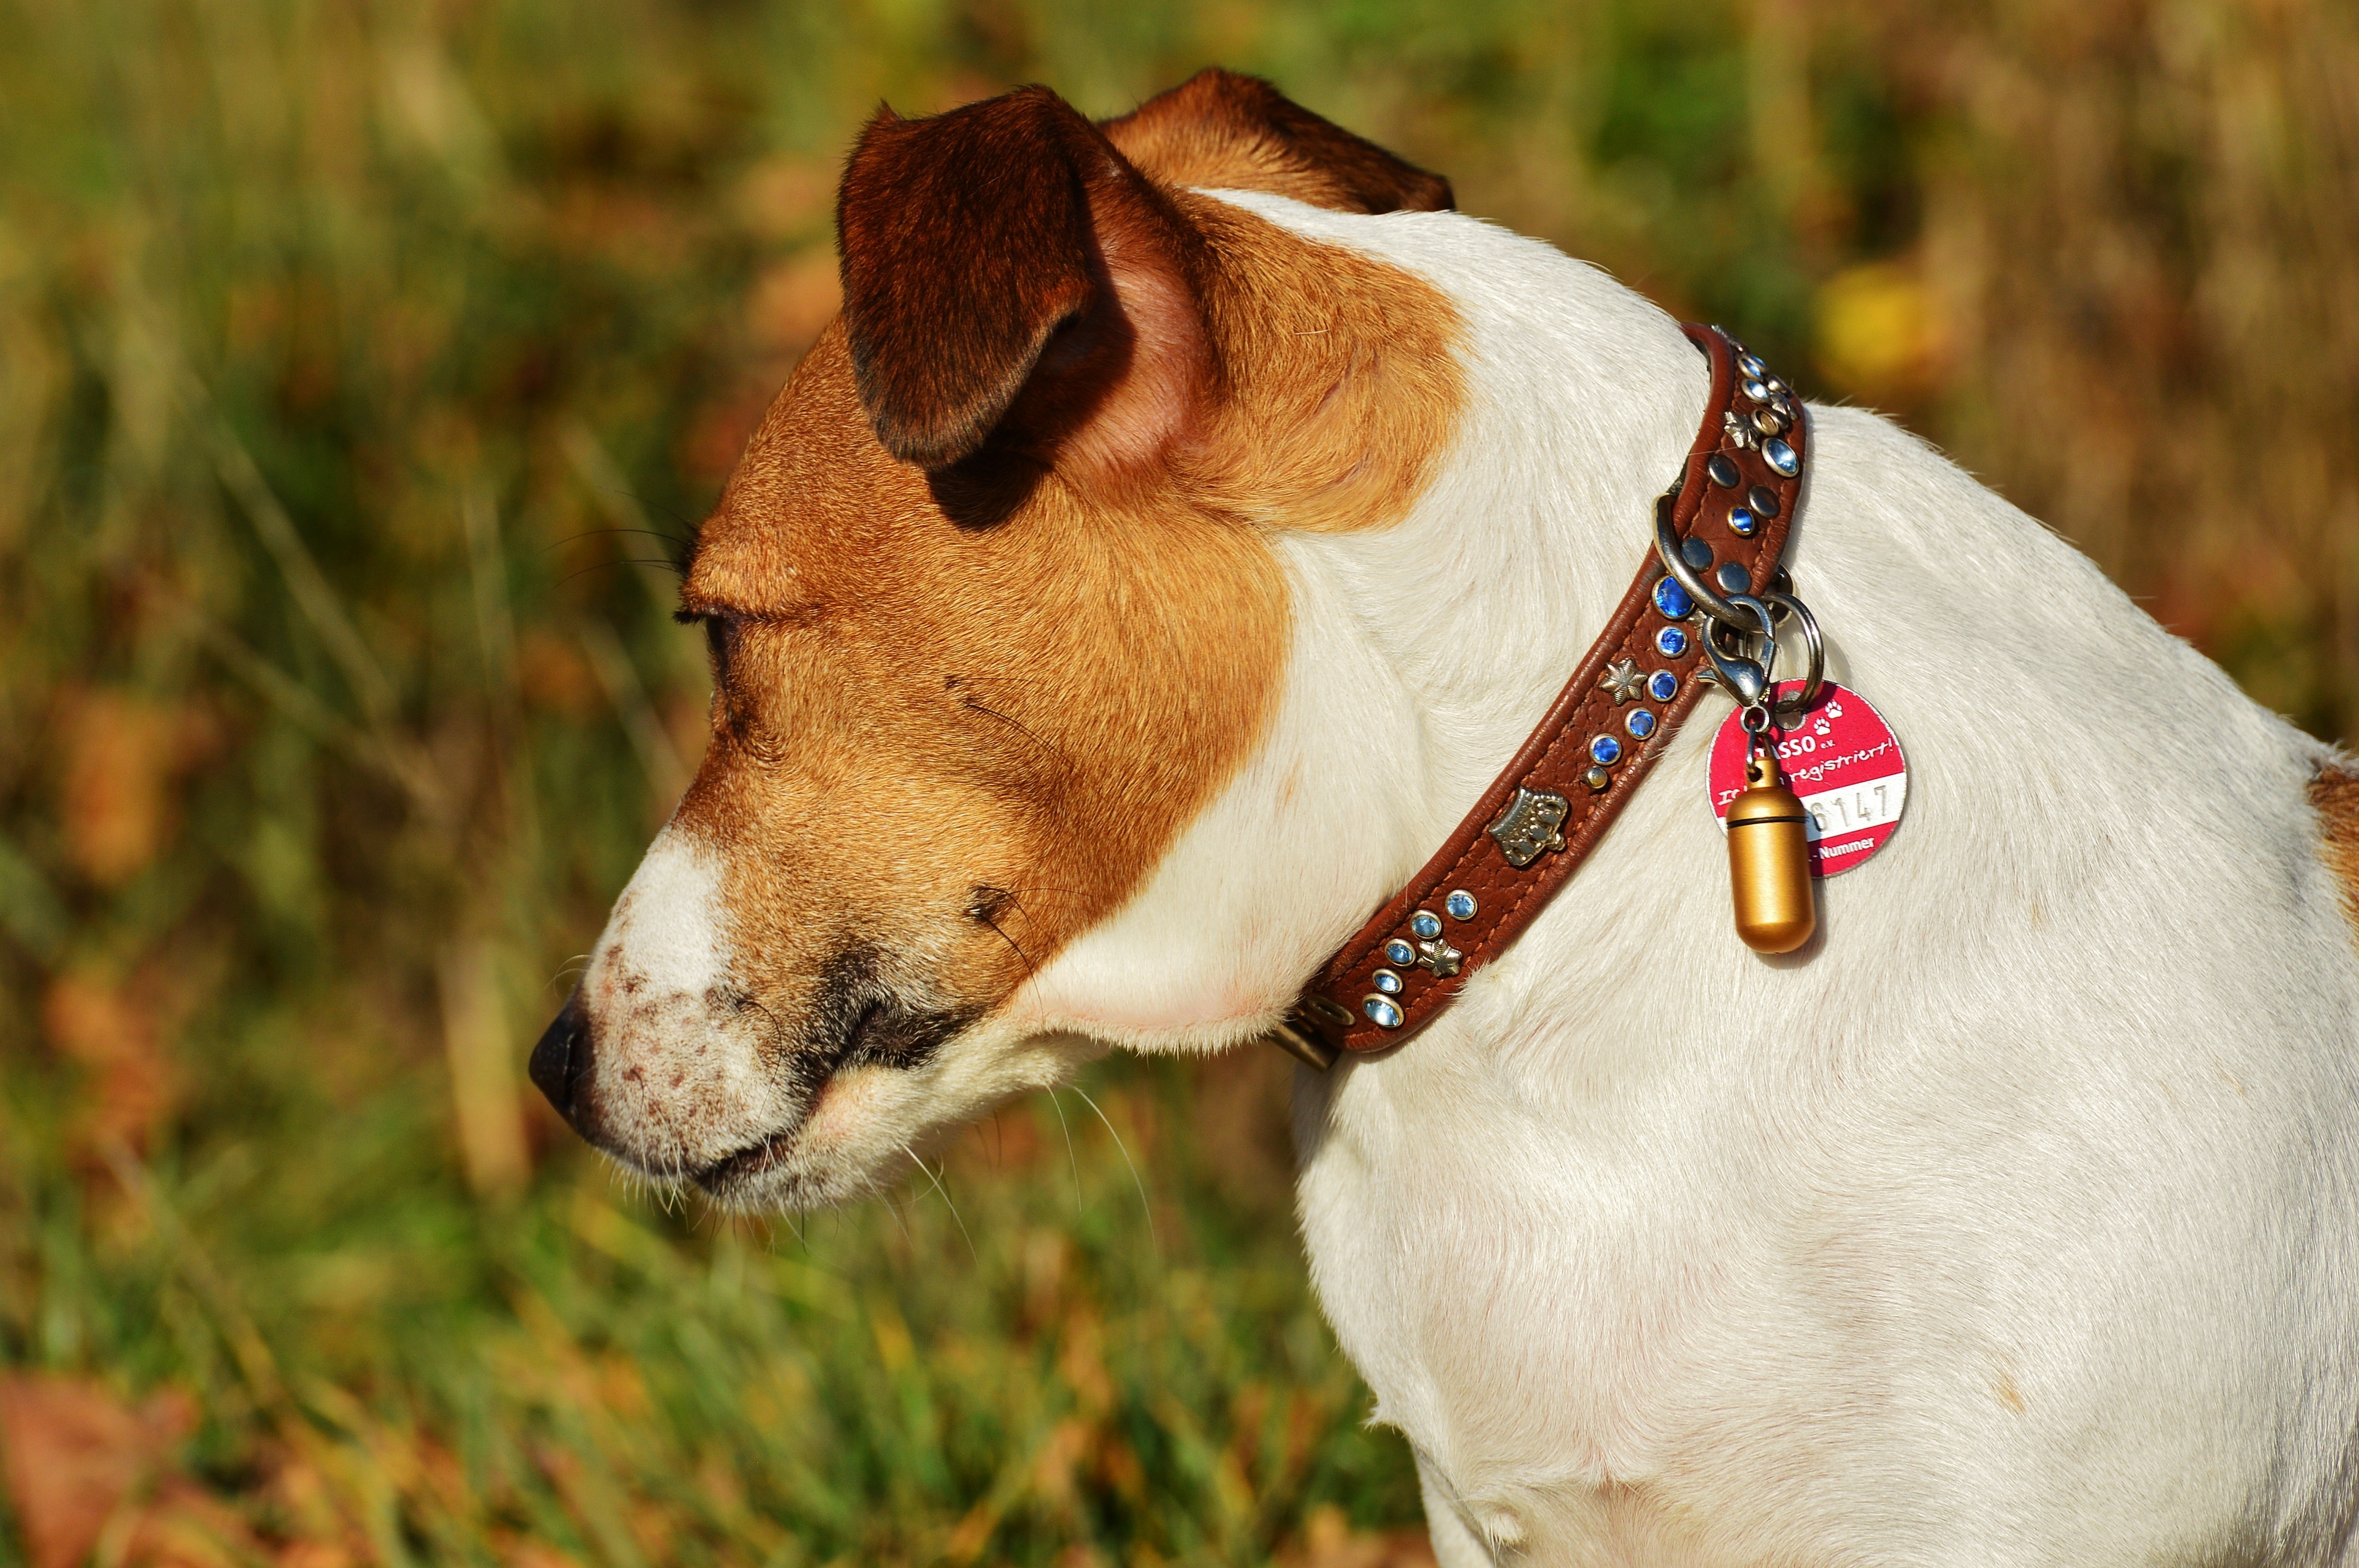 Terrier, Dog, Animal, Pet, Jack Russell, one animal, domestic animals